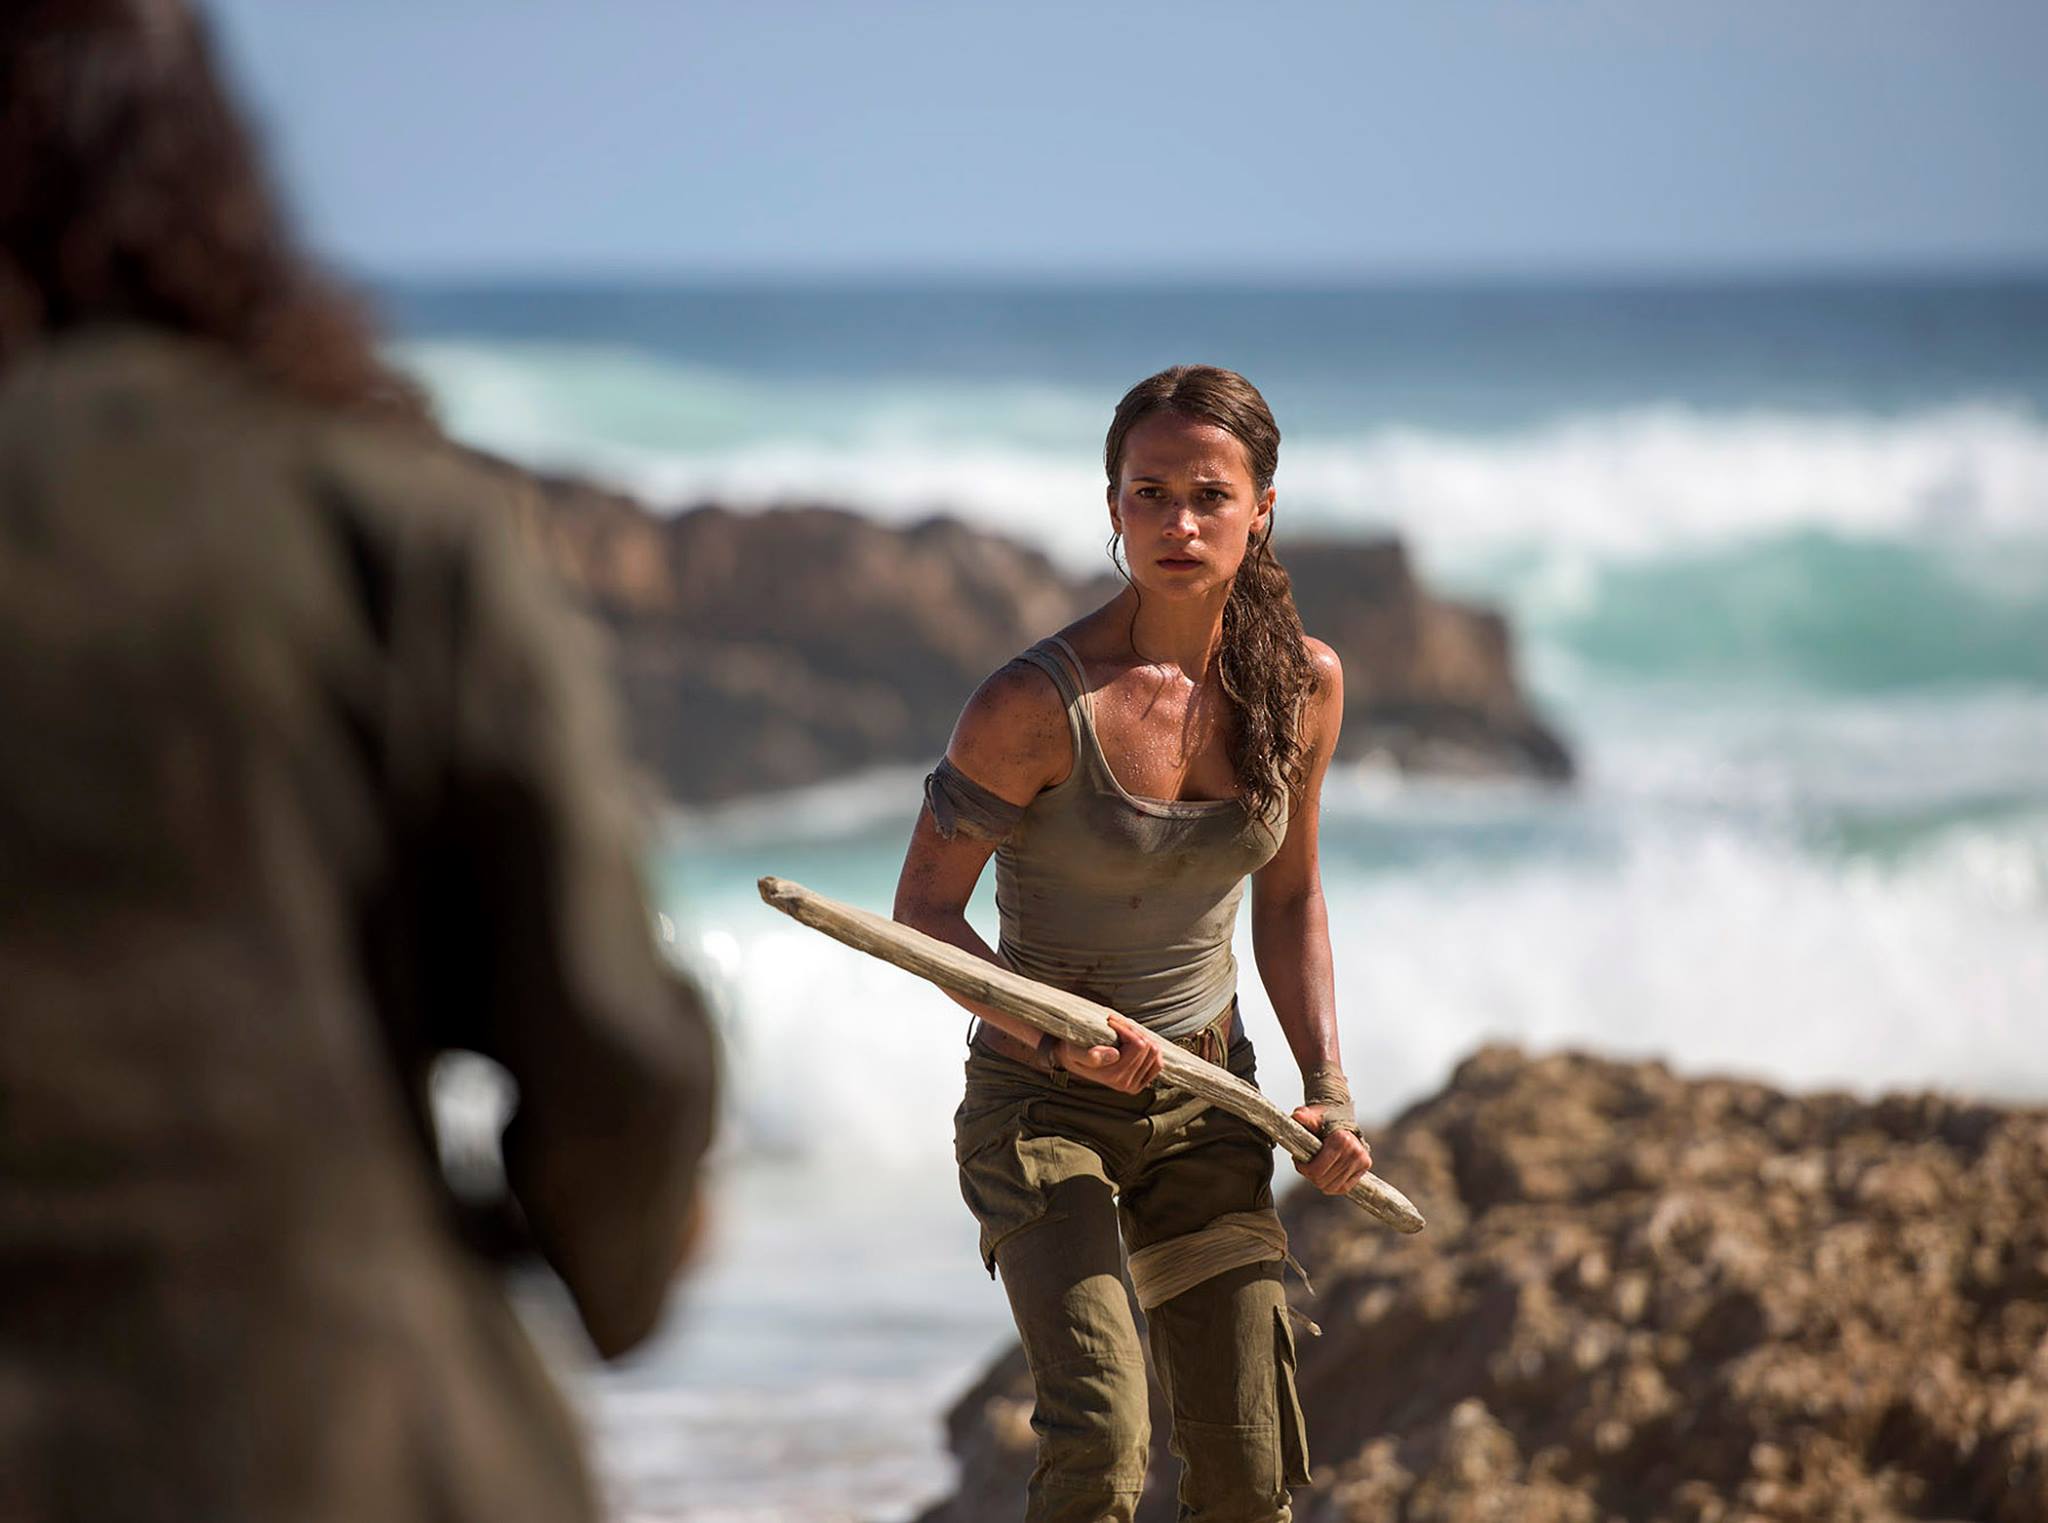  ALICIA VIKANDER as Lara Croft in Warner Bros. Pictures and Metro-Goldwyn-Mayer Pictures&rsquo; action adventure &ldquo;TOMB RAIDER,&rdquo; opening March 16, 2018. Photo by Graham Bortholomew 